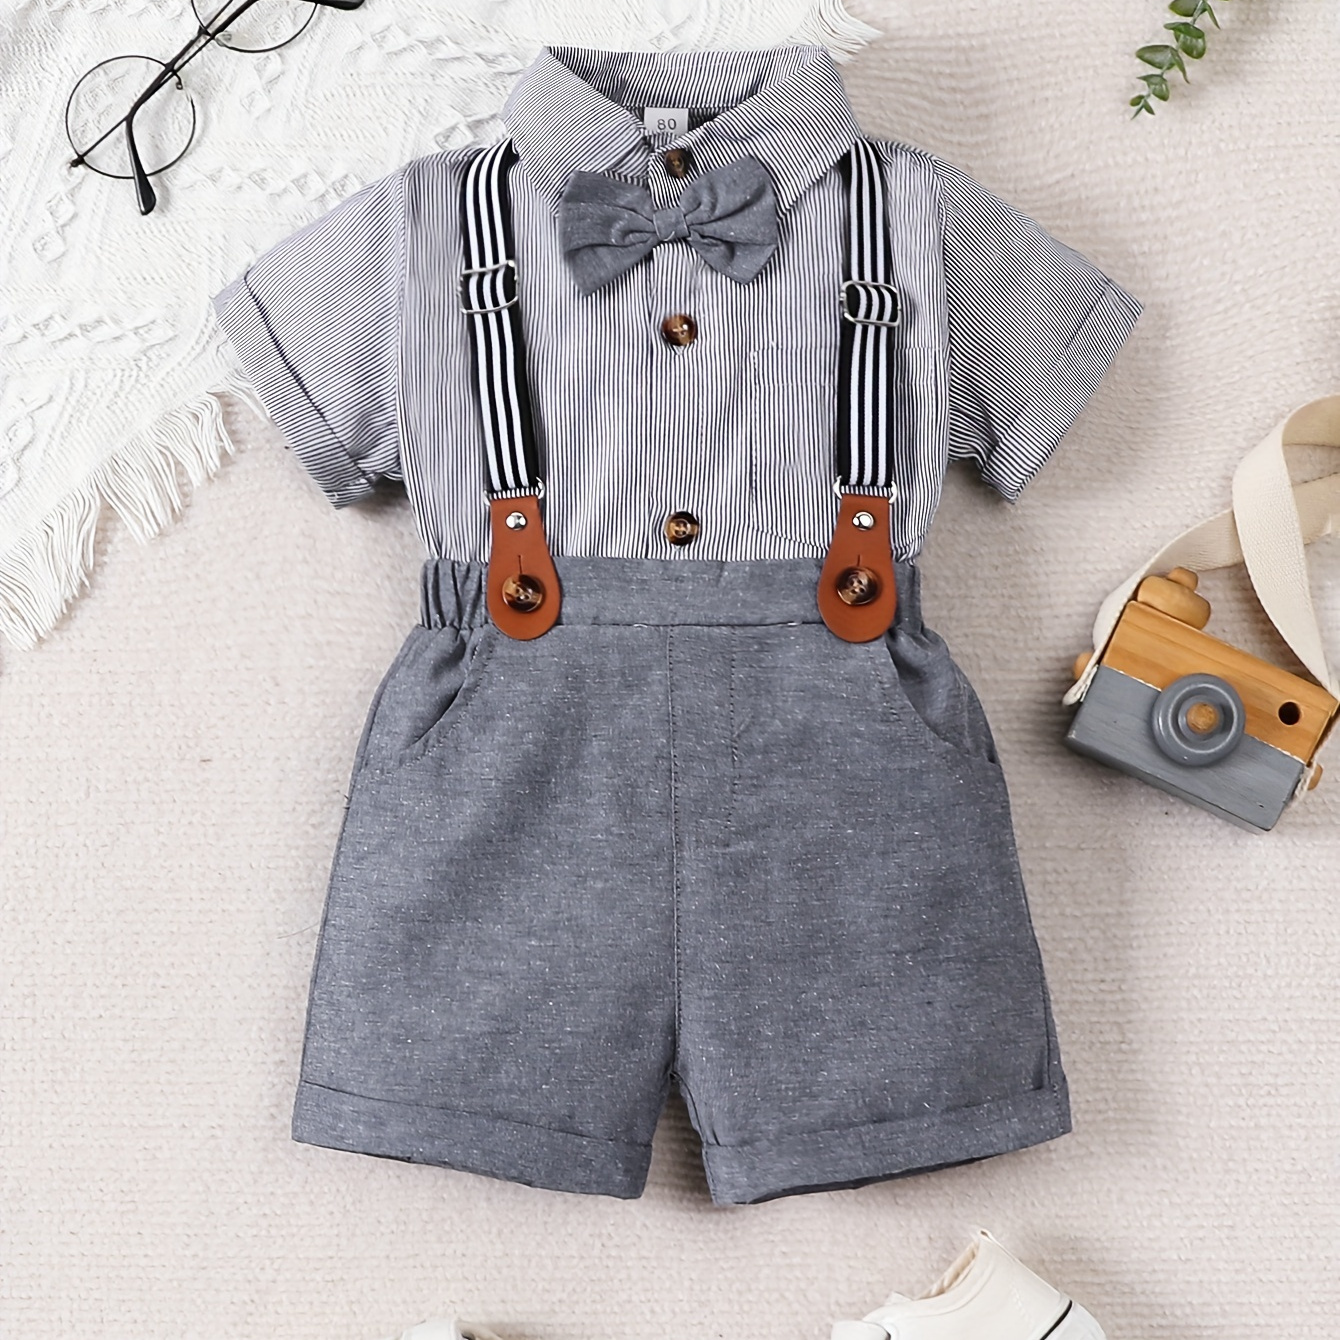 

2pcs Gentleman Outfit For Infant & Toddler, Bowtie Vertical Stripe Pattern Shirt & Bib Shorts Set, Formal Wear For Photography Birthday Party, Baby Boy's Clothes